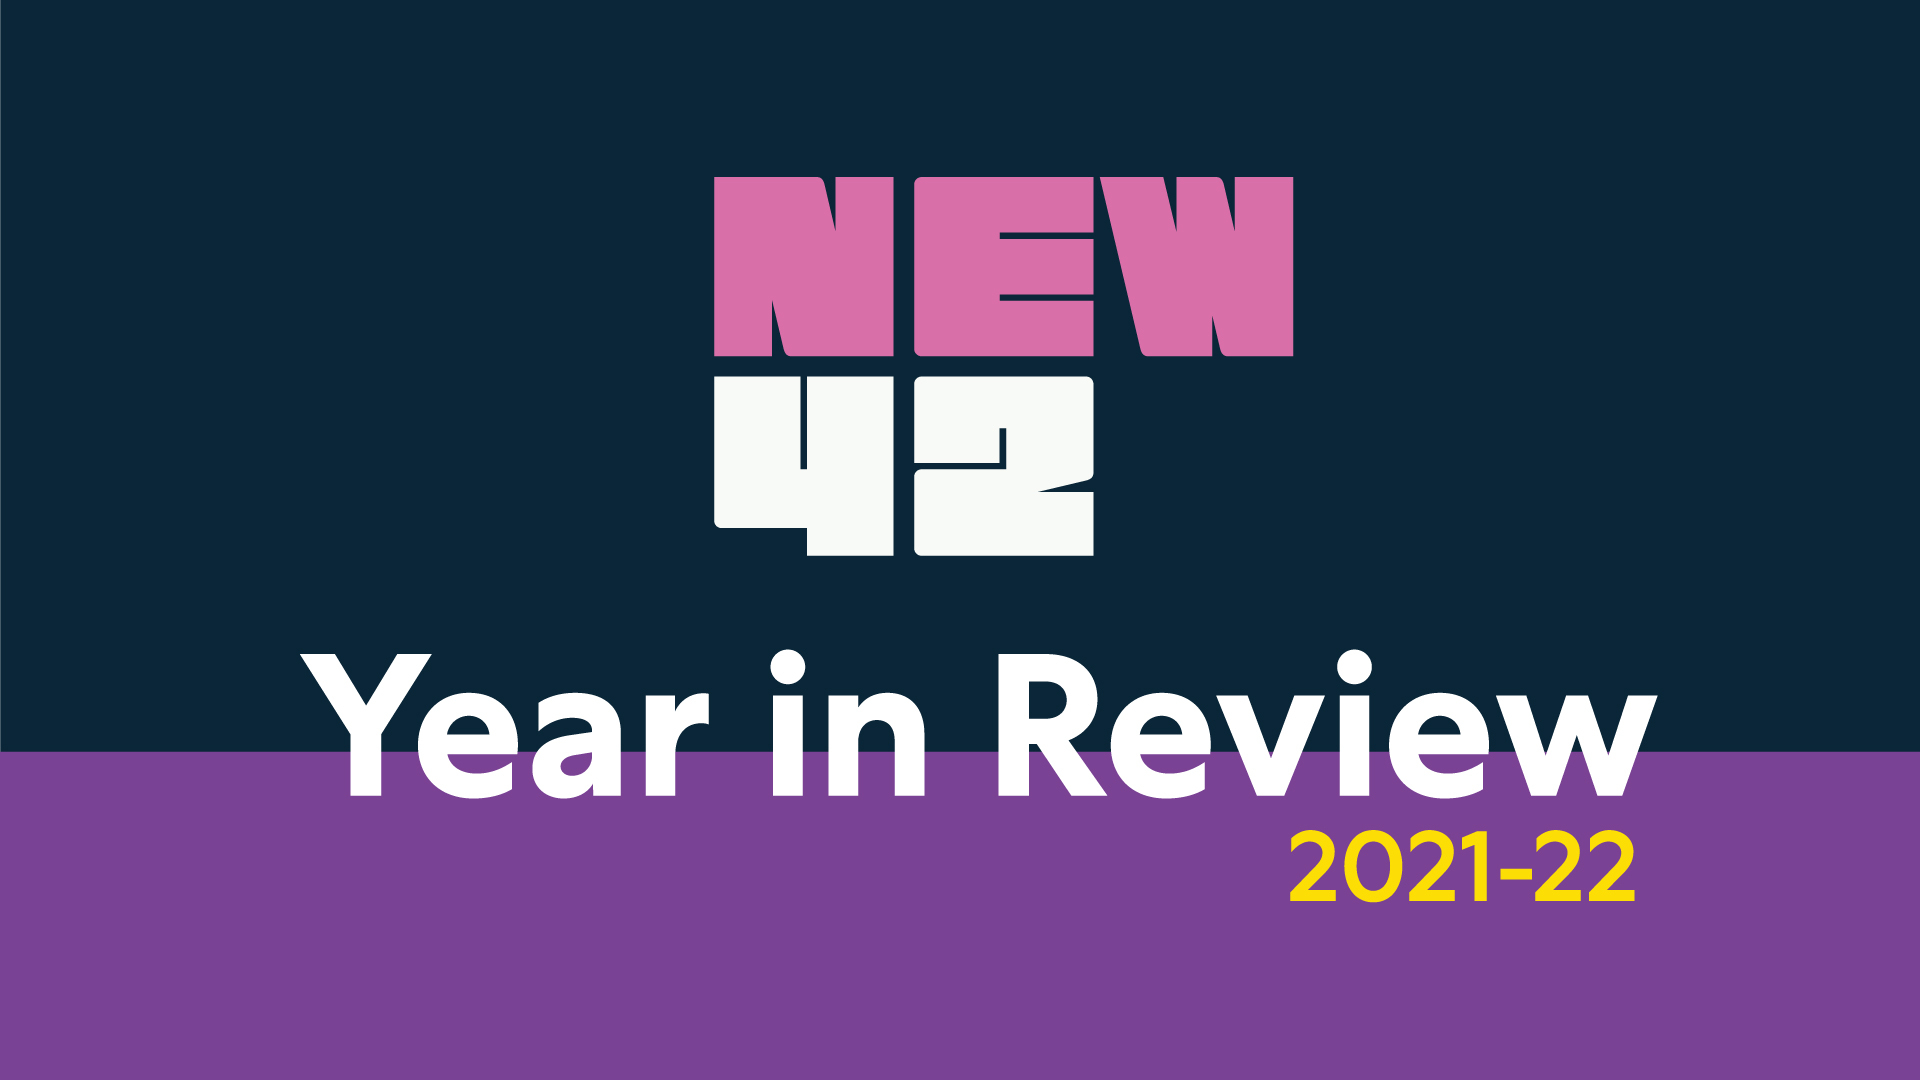 The New 42 logo on a dark blue background with the words "Year in Review" in white below. Below that are the words "2021-22" in yellow.